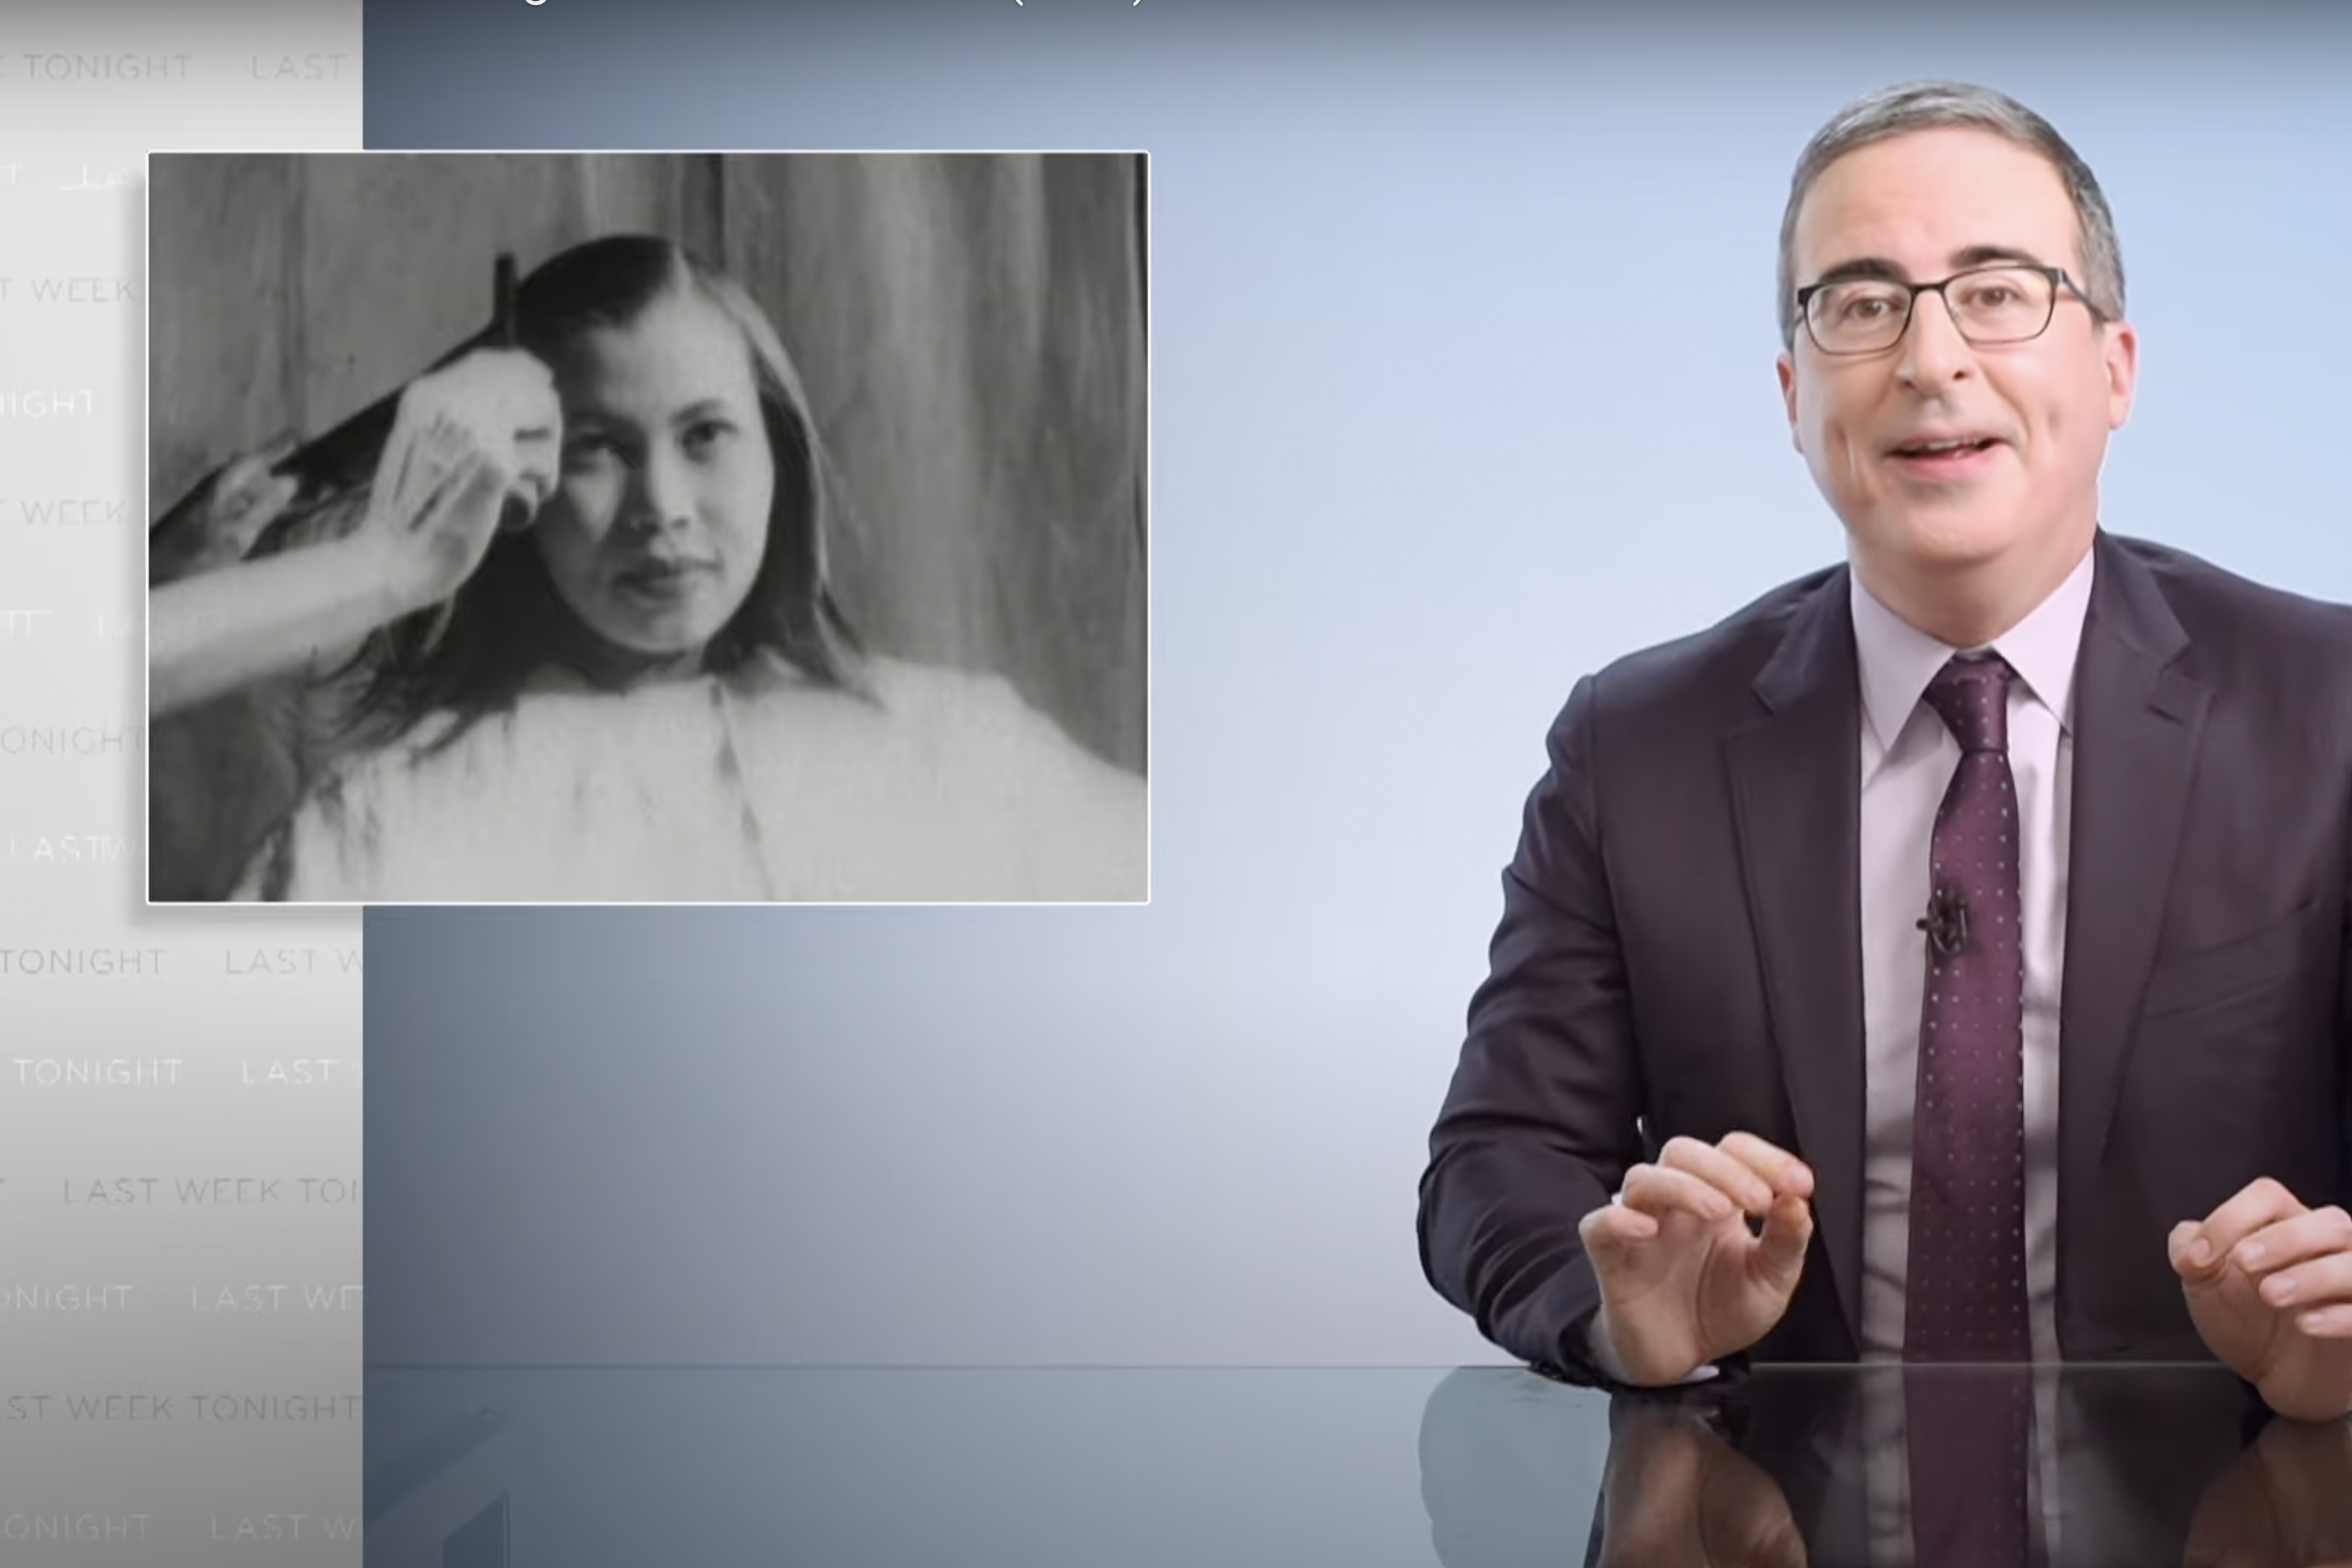 John Oliver sits in his void next to a black-and-white photo of someone running a hot comb through a young Black woman's hair